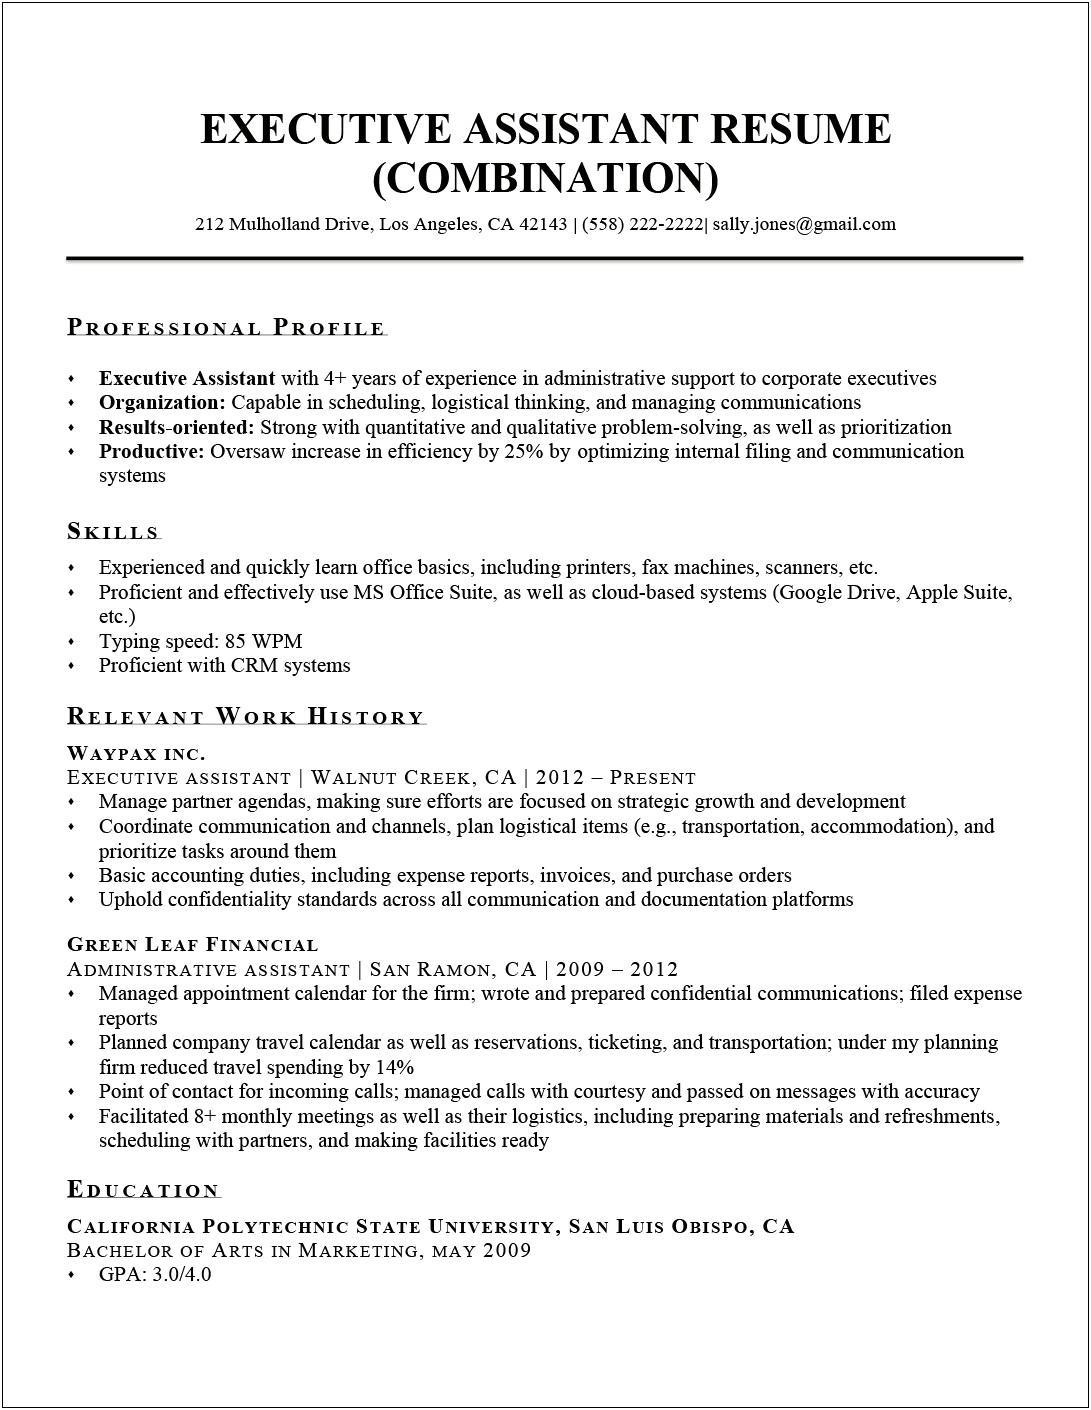 Office Worker & Administrative Assistant Resume Examples